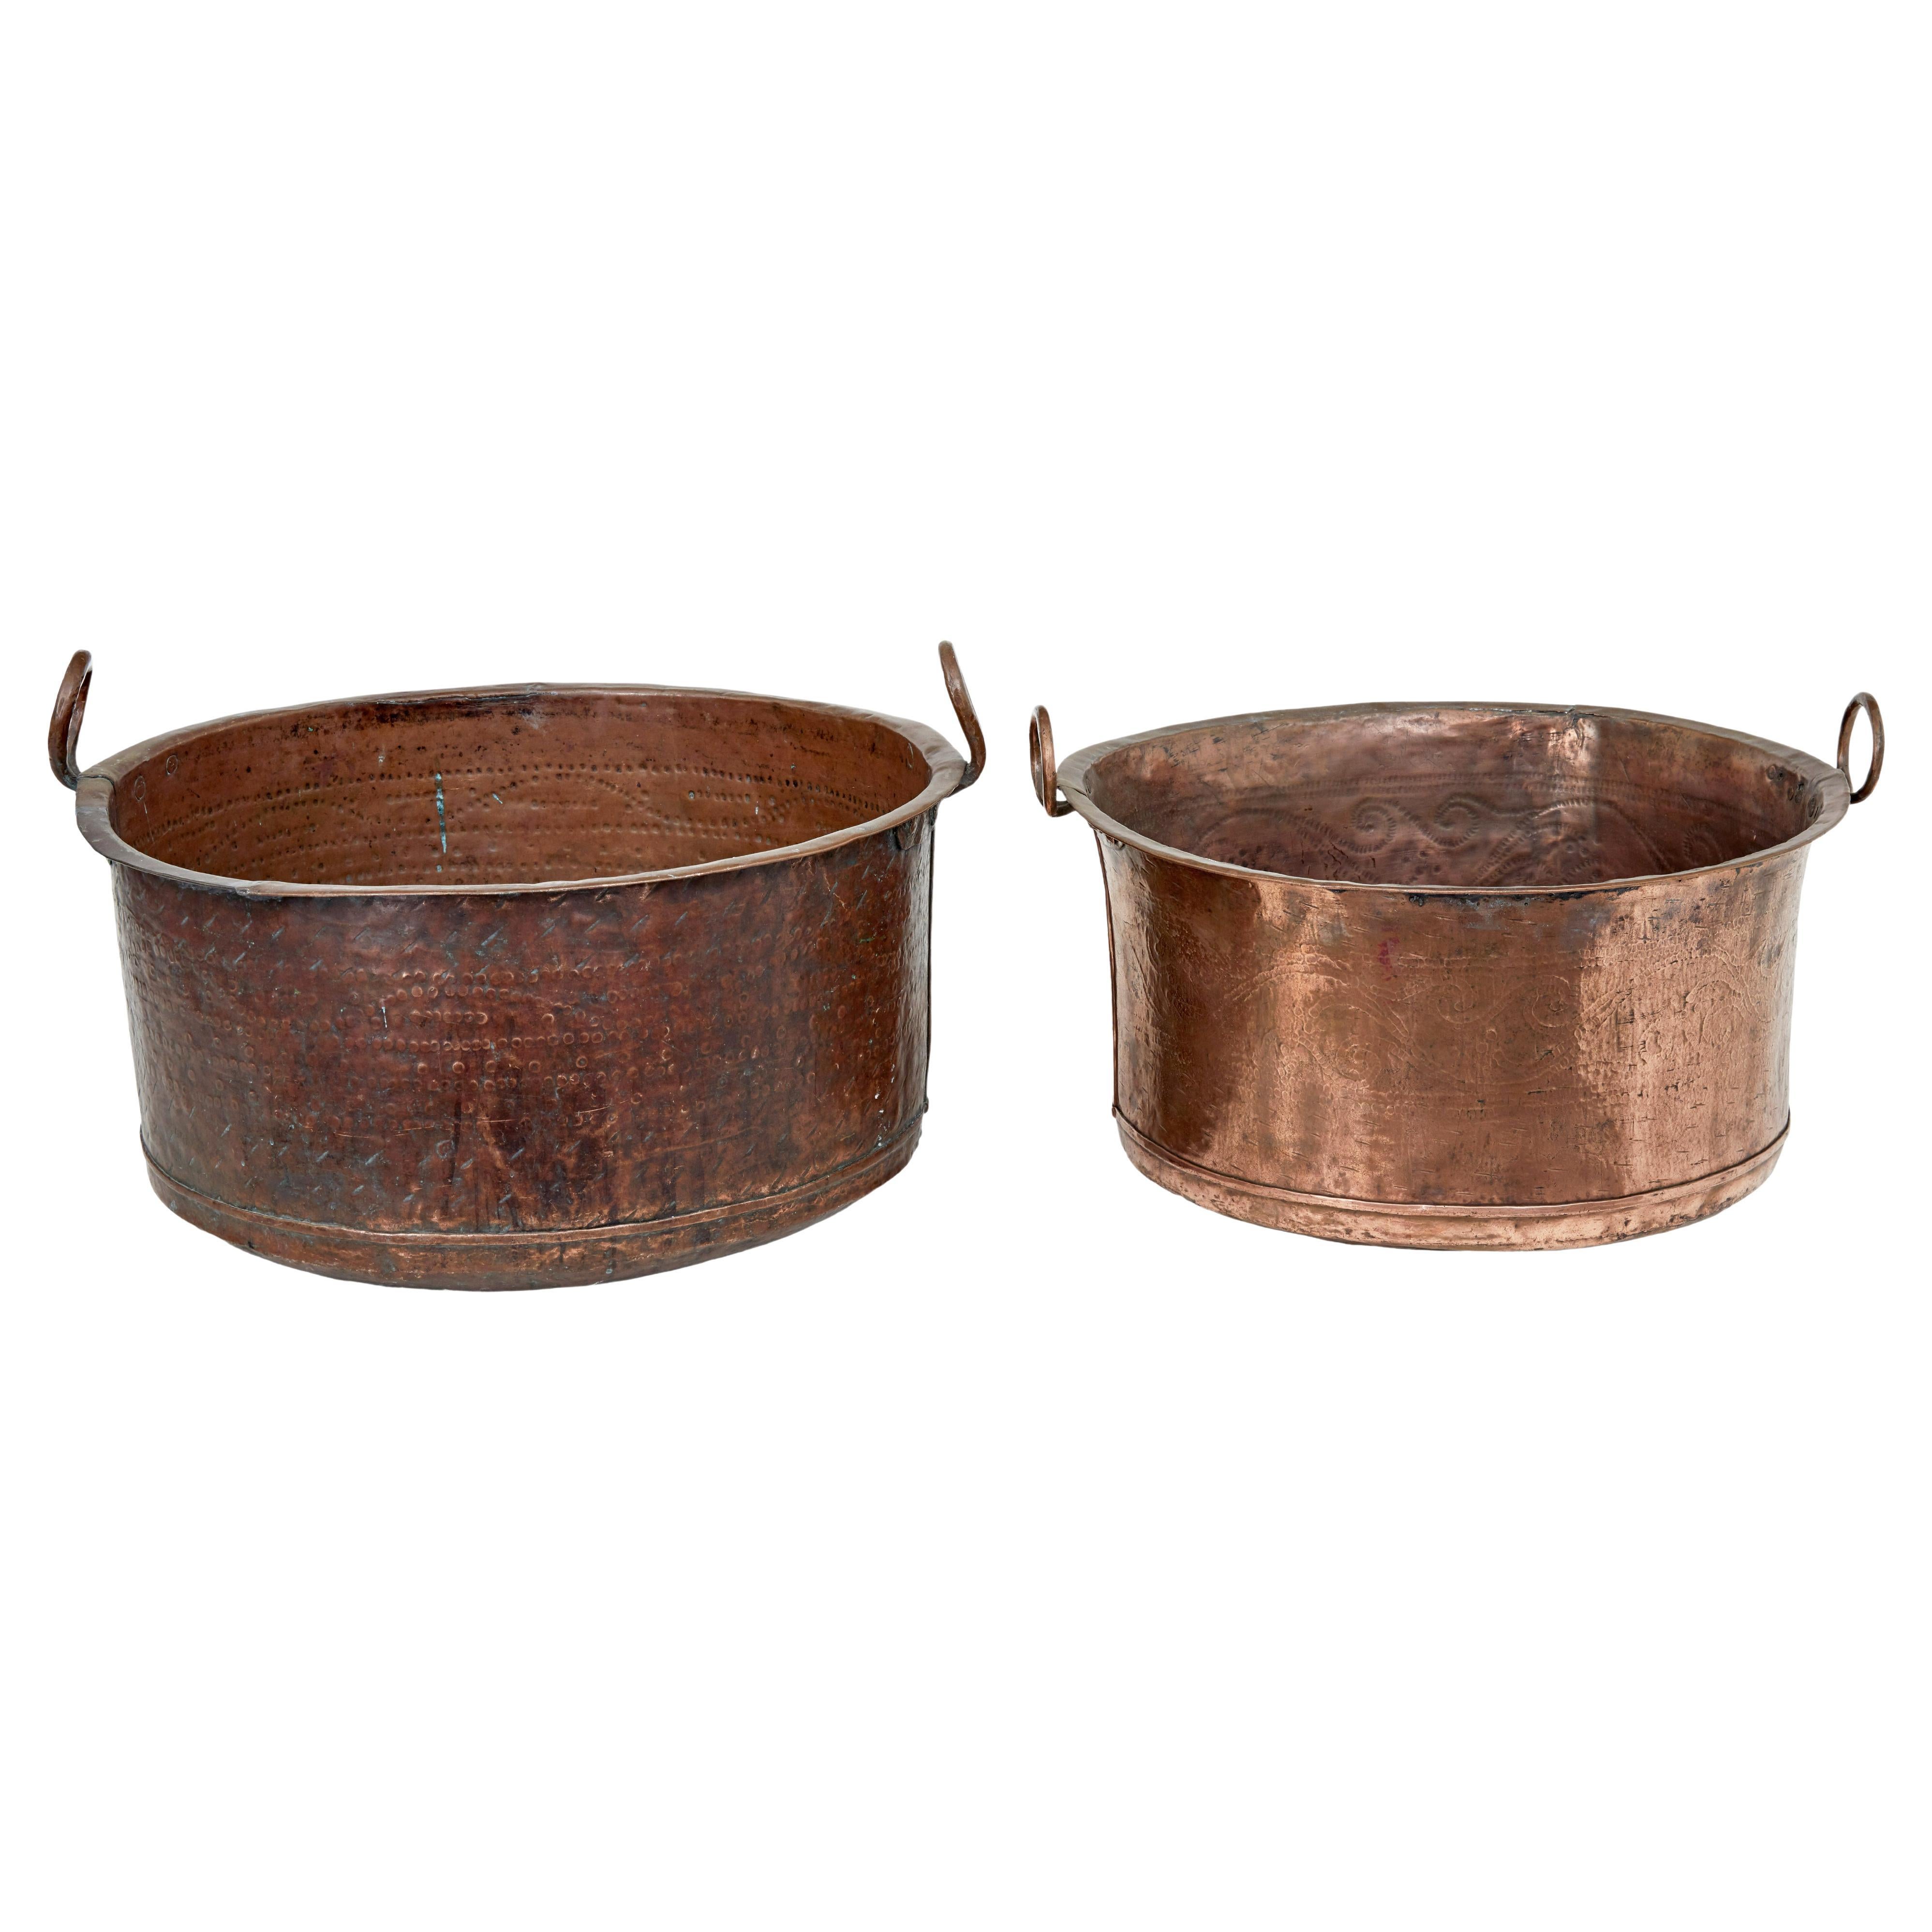 2 19th century Victorian large copper cooking vessels For Sale